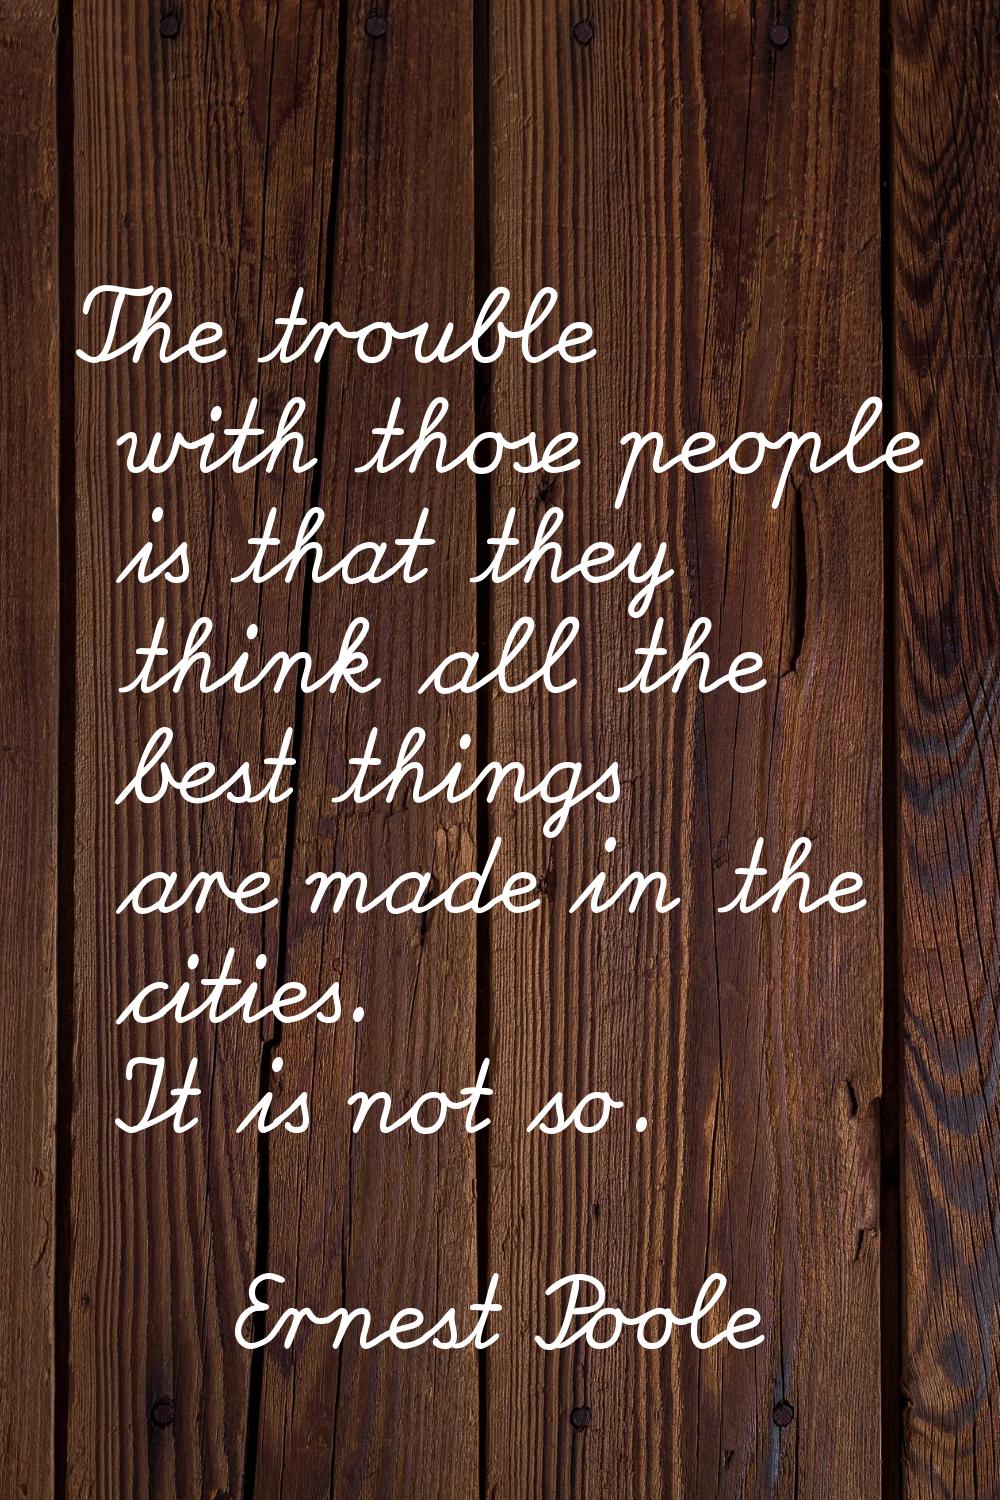 The trouble with those people is that they think all the best things are made in the cities. It is 